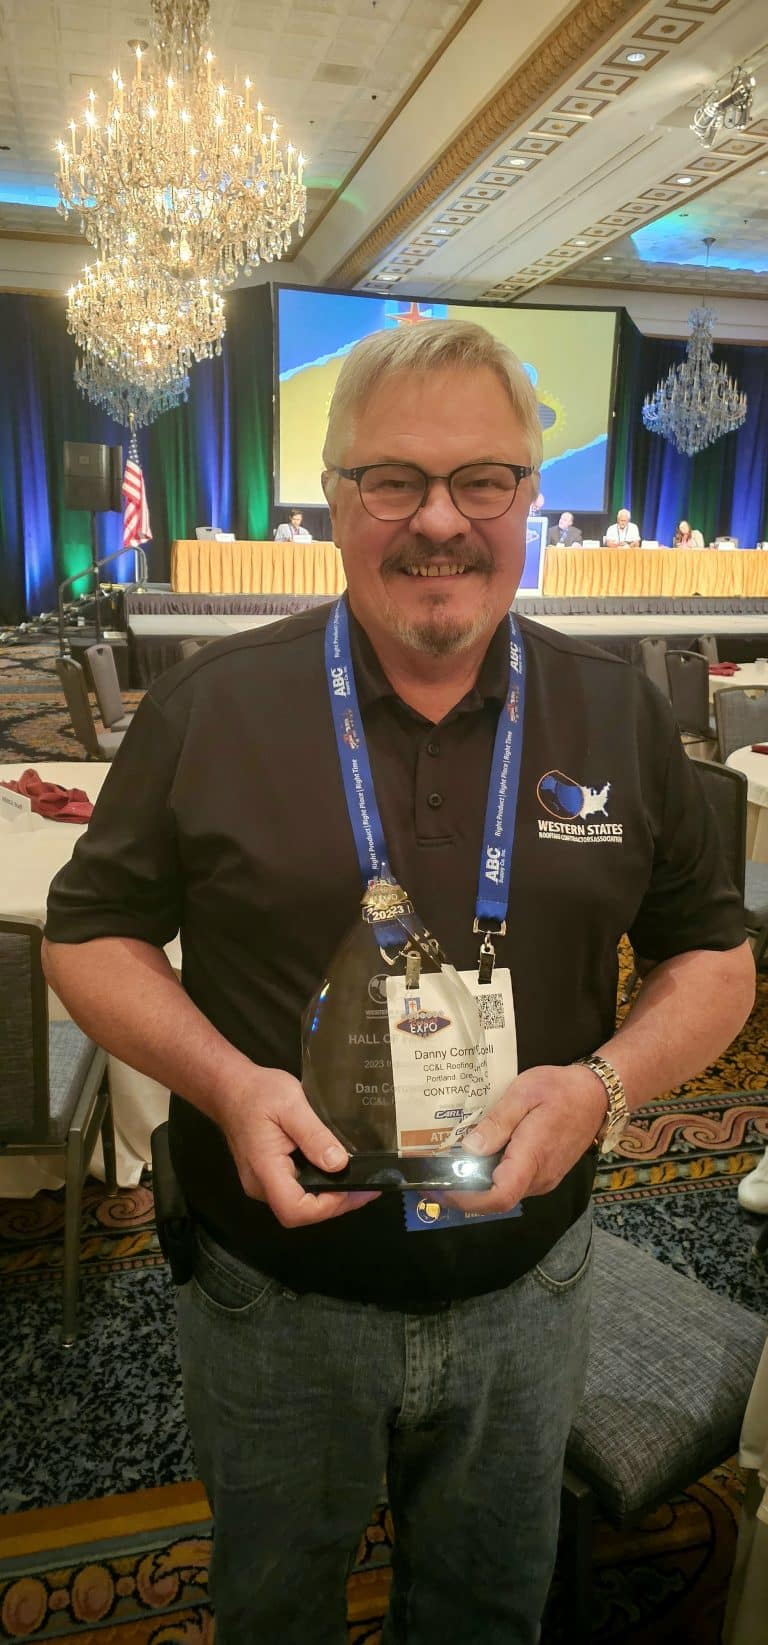 CC&L Roofing Founder Danny Cornwell Inducted into the WSRCA Hall of Fame! 1